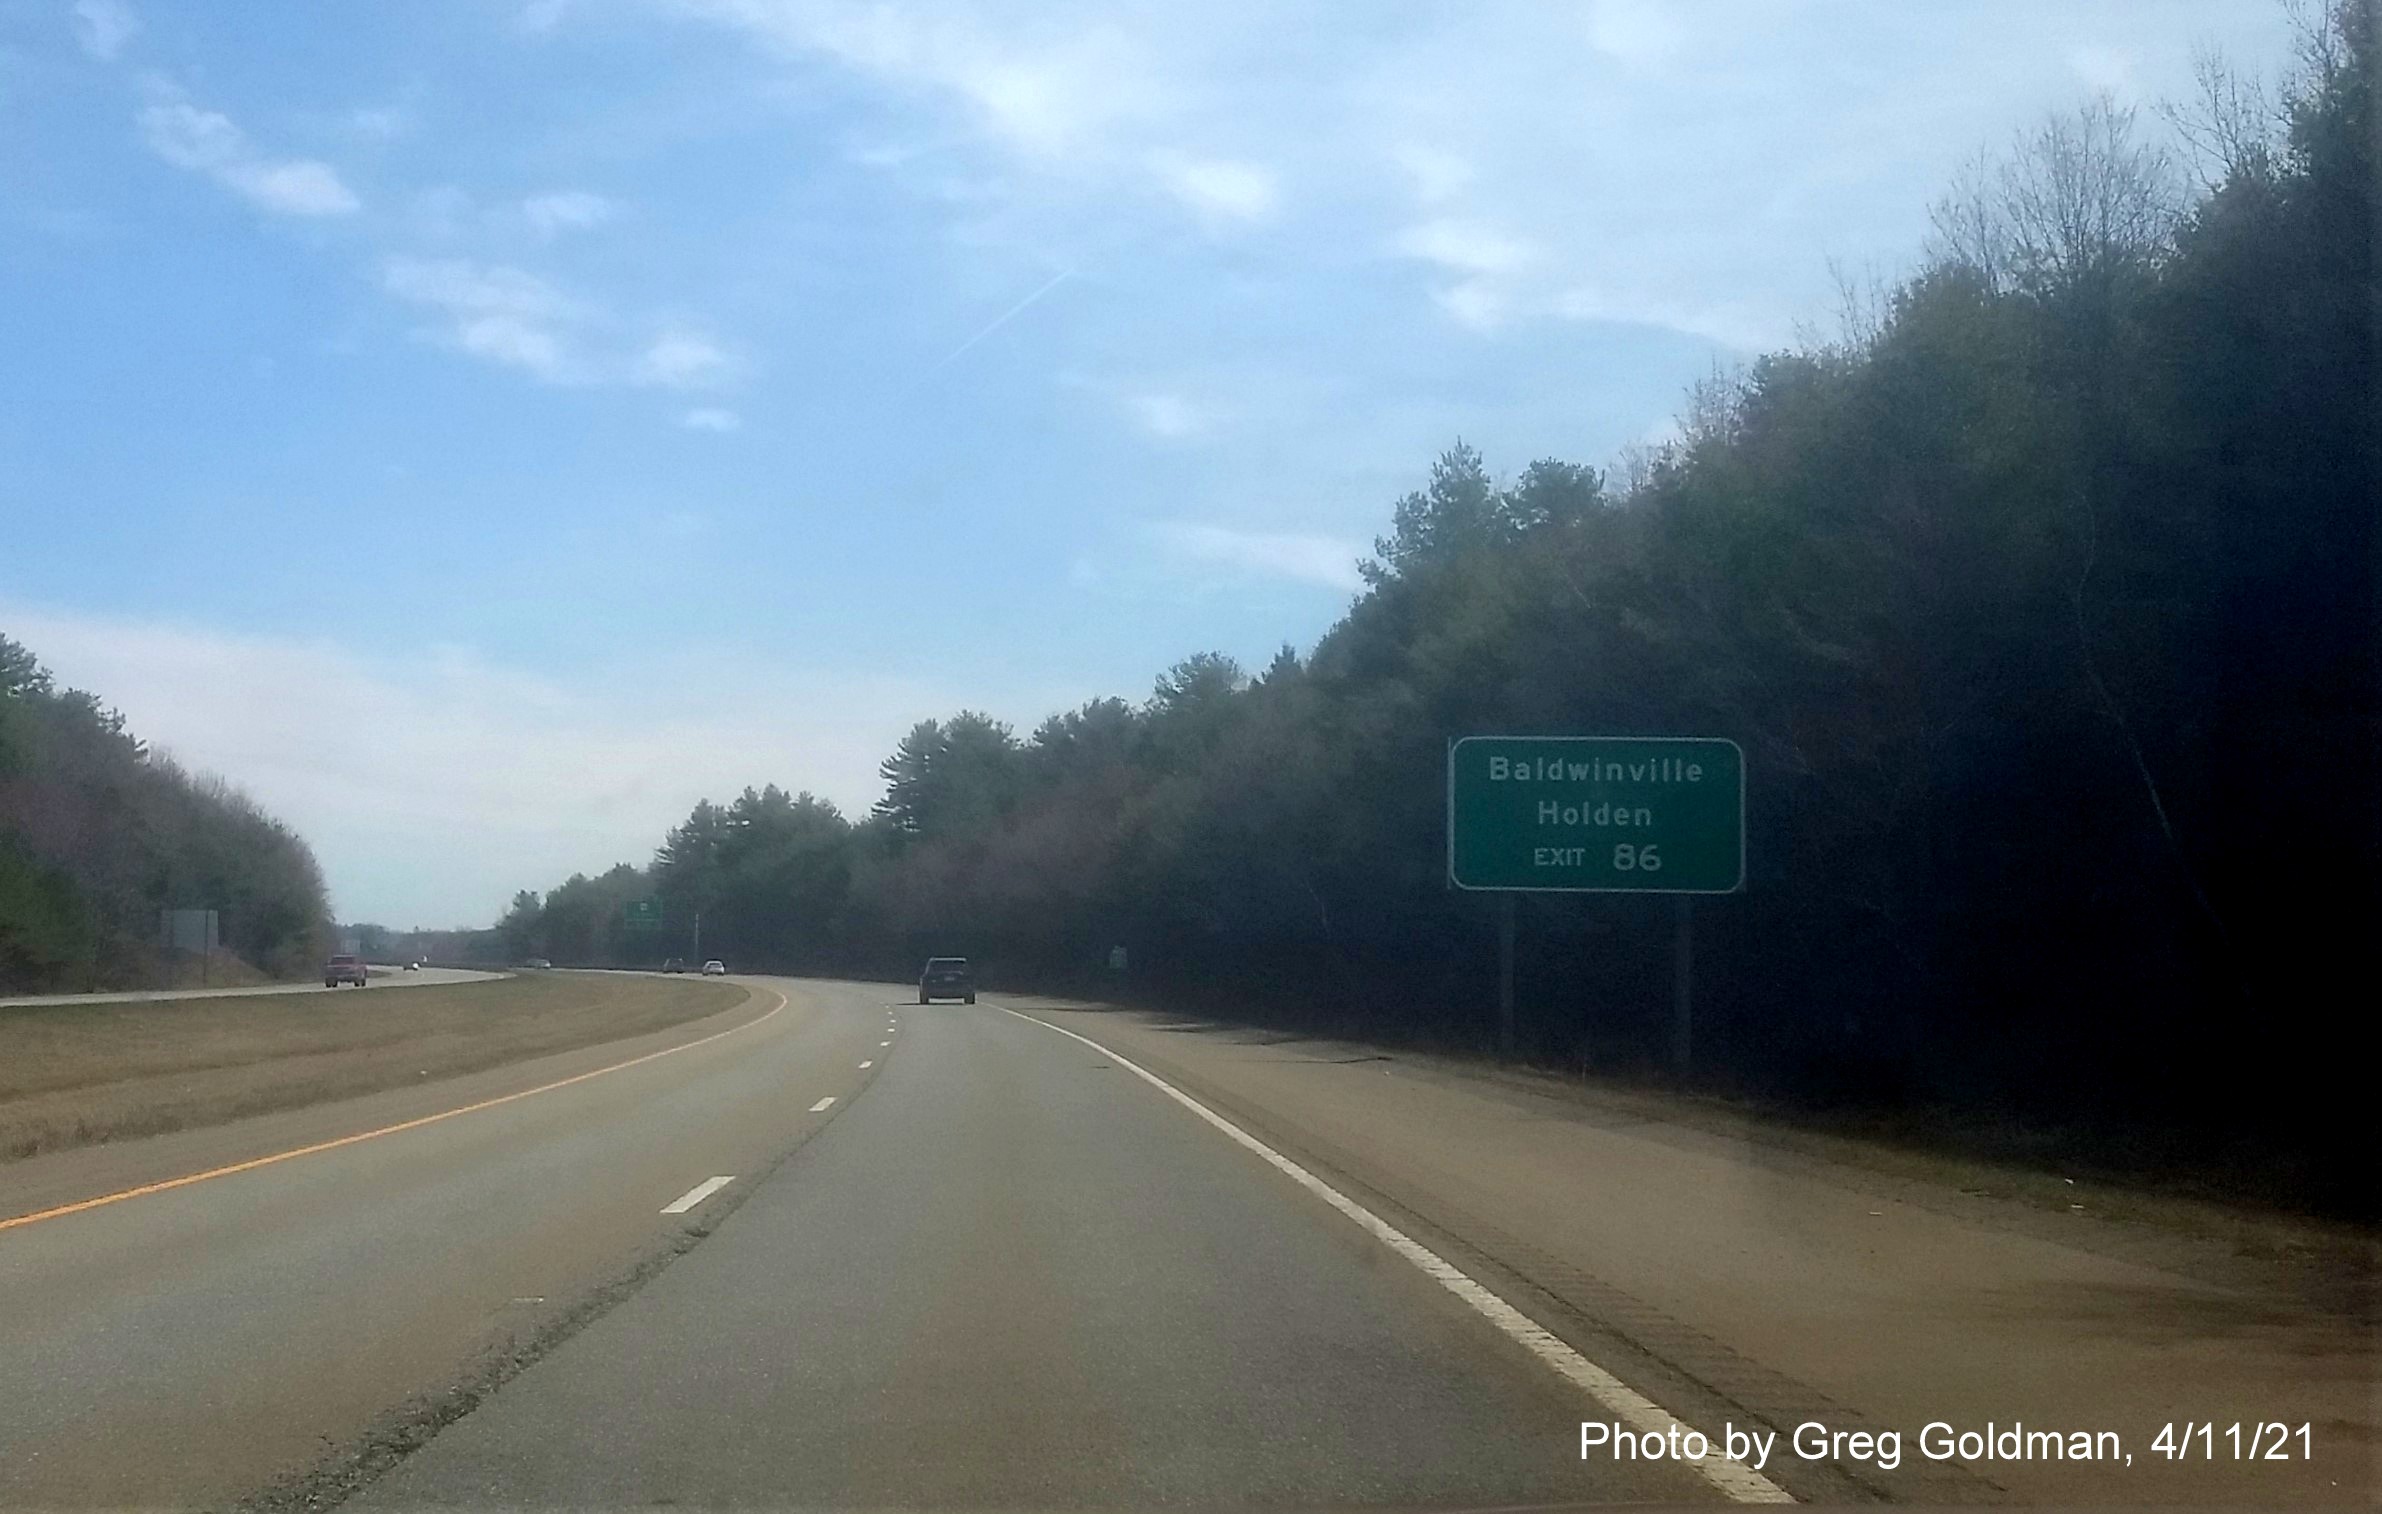 Image of auxiliary sign for MA 68 Exit with new milepost based exit number on MA 2 East in Gardner, by Greg Goldman, April 2021